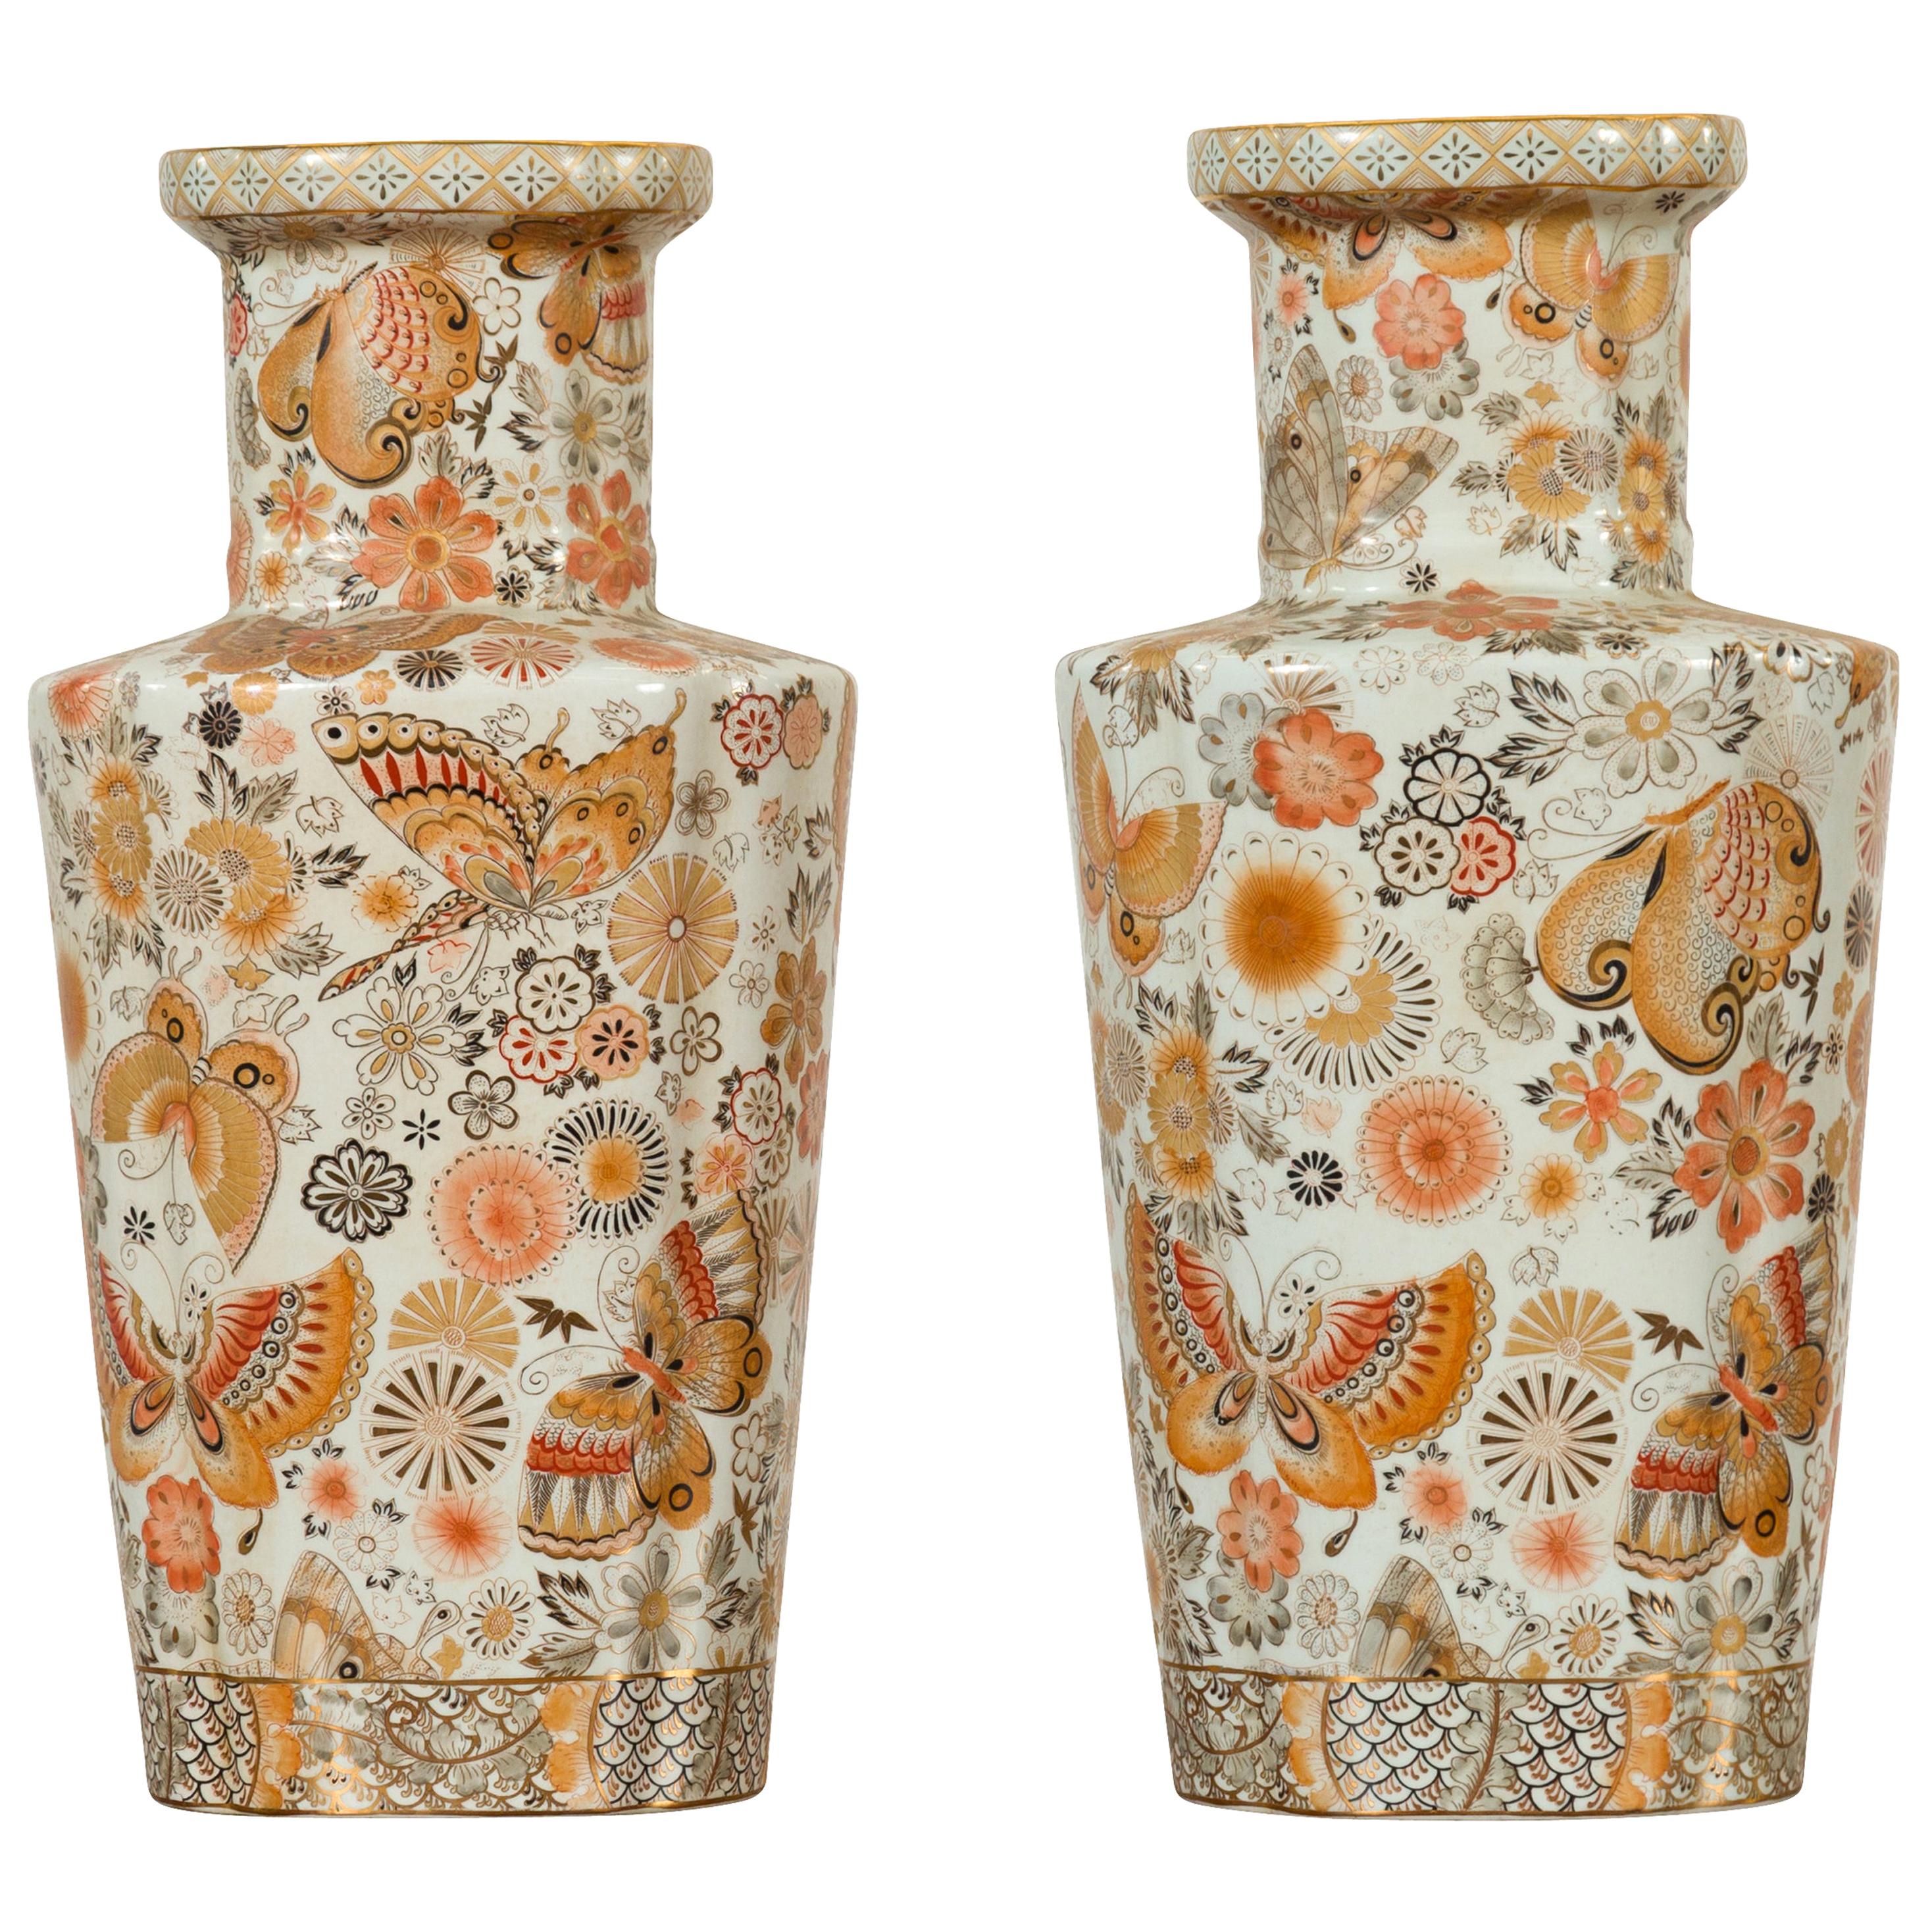 Pair of Chinese Vintage Japanese Kutani Style Vases with Flowers and Butterflies